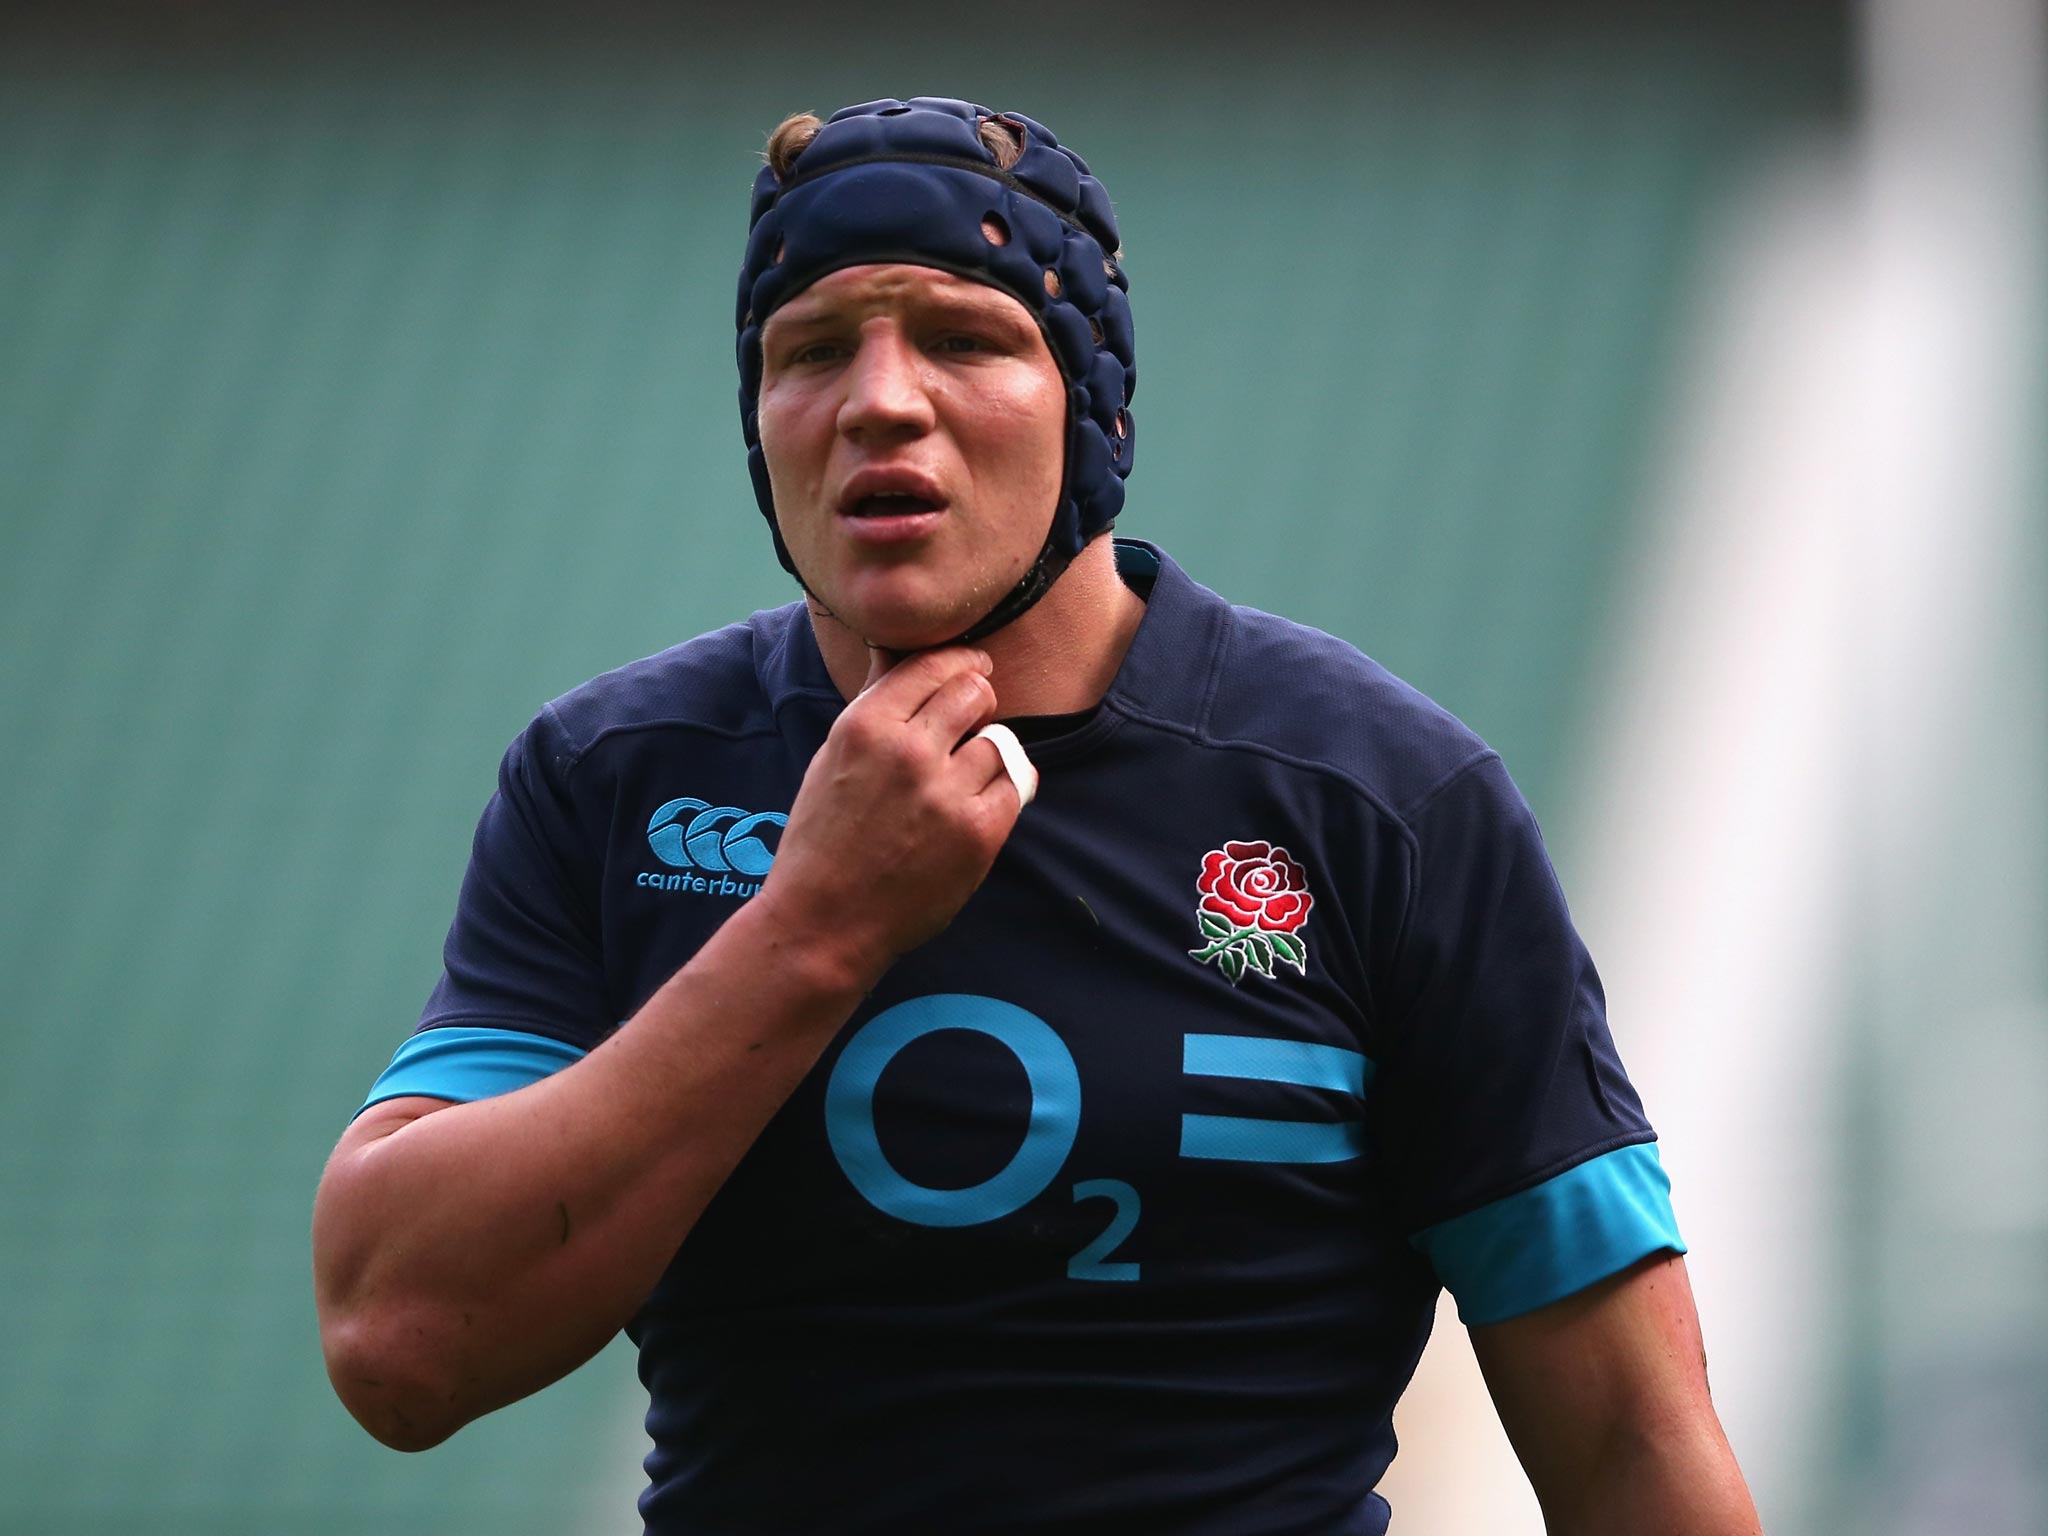 England flanker Tom Johnson will return to the international scene after being named in the squad to face Wales